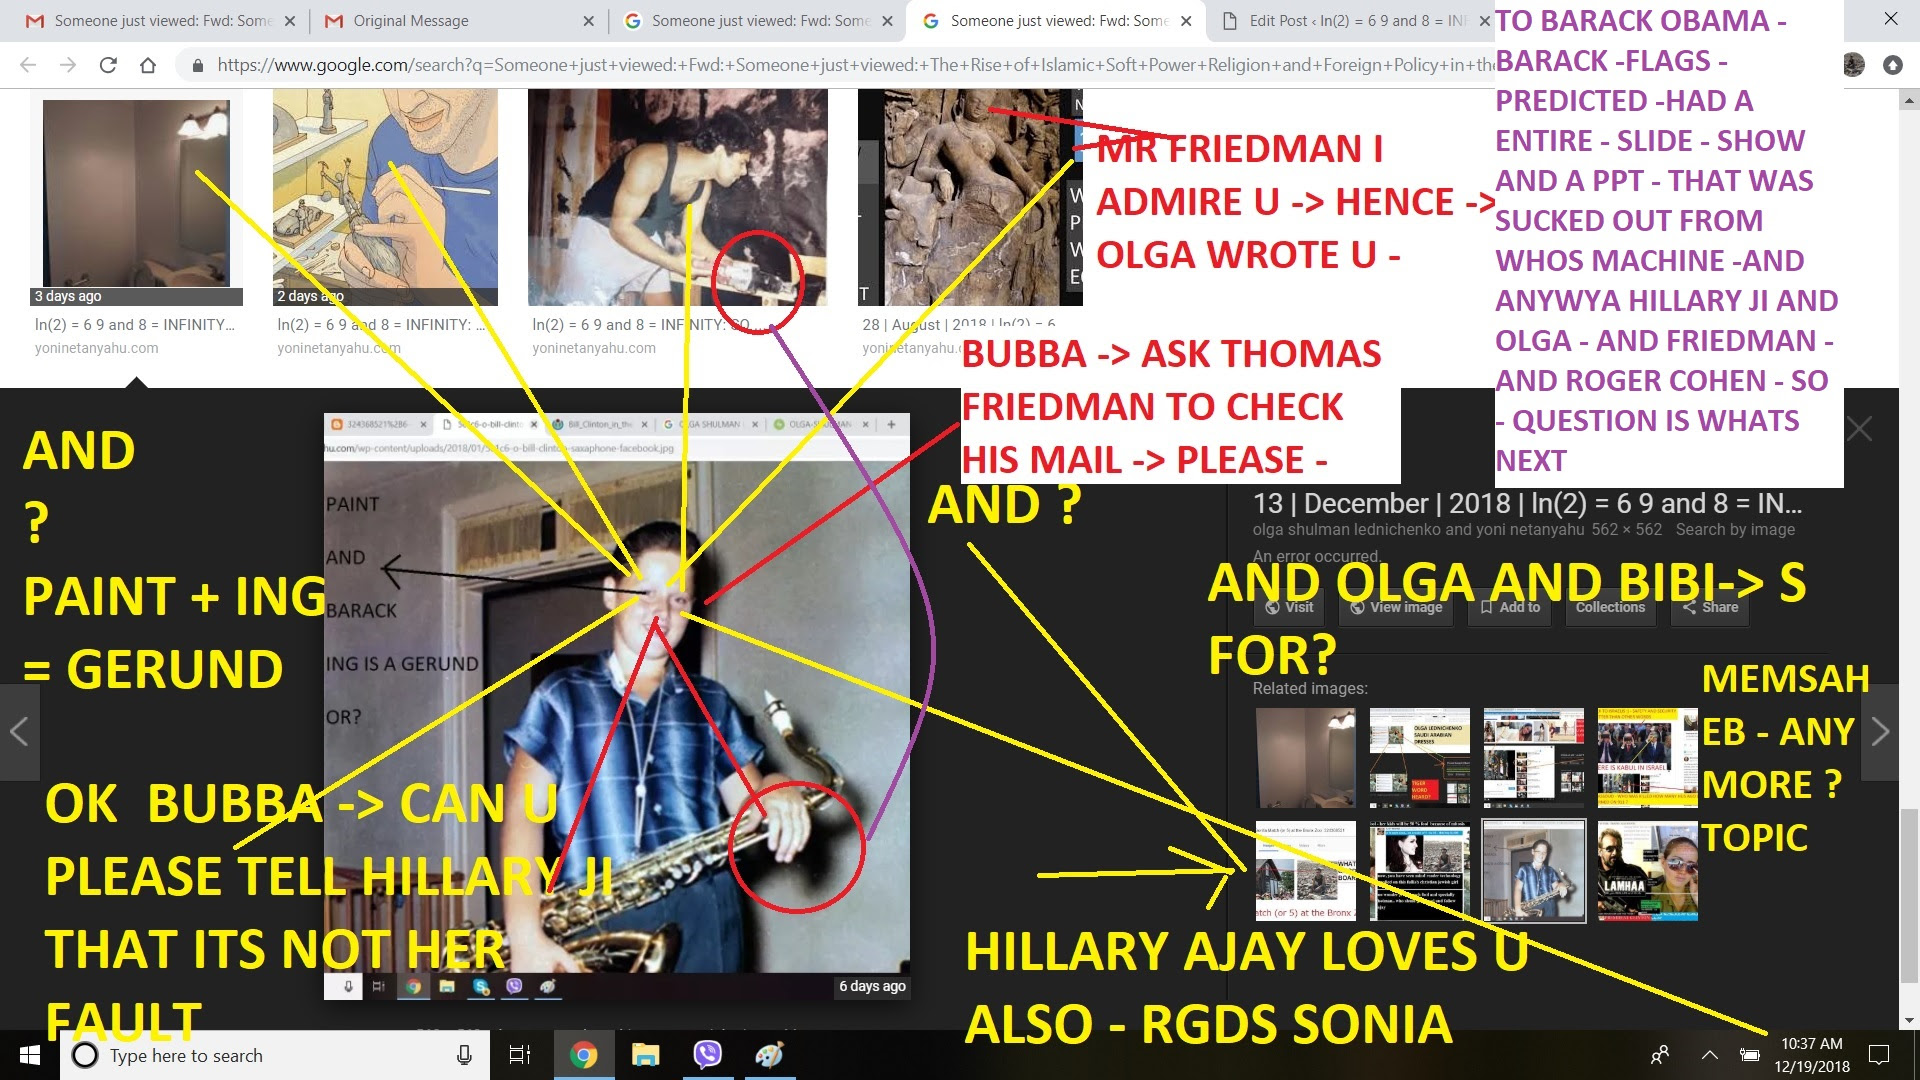 TO BARACK OBAMA - BARACK -FLAGS - PREDICTED -HAD A ENTIRE - SLIDE - SHOW AND A PPT - THAT WAS SUCKED OUT FROM WHOS MACHINE -AND ANYWYA HILLARY JI AND OLGA - AND FRIEDMAN - AND ROGER COHE